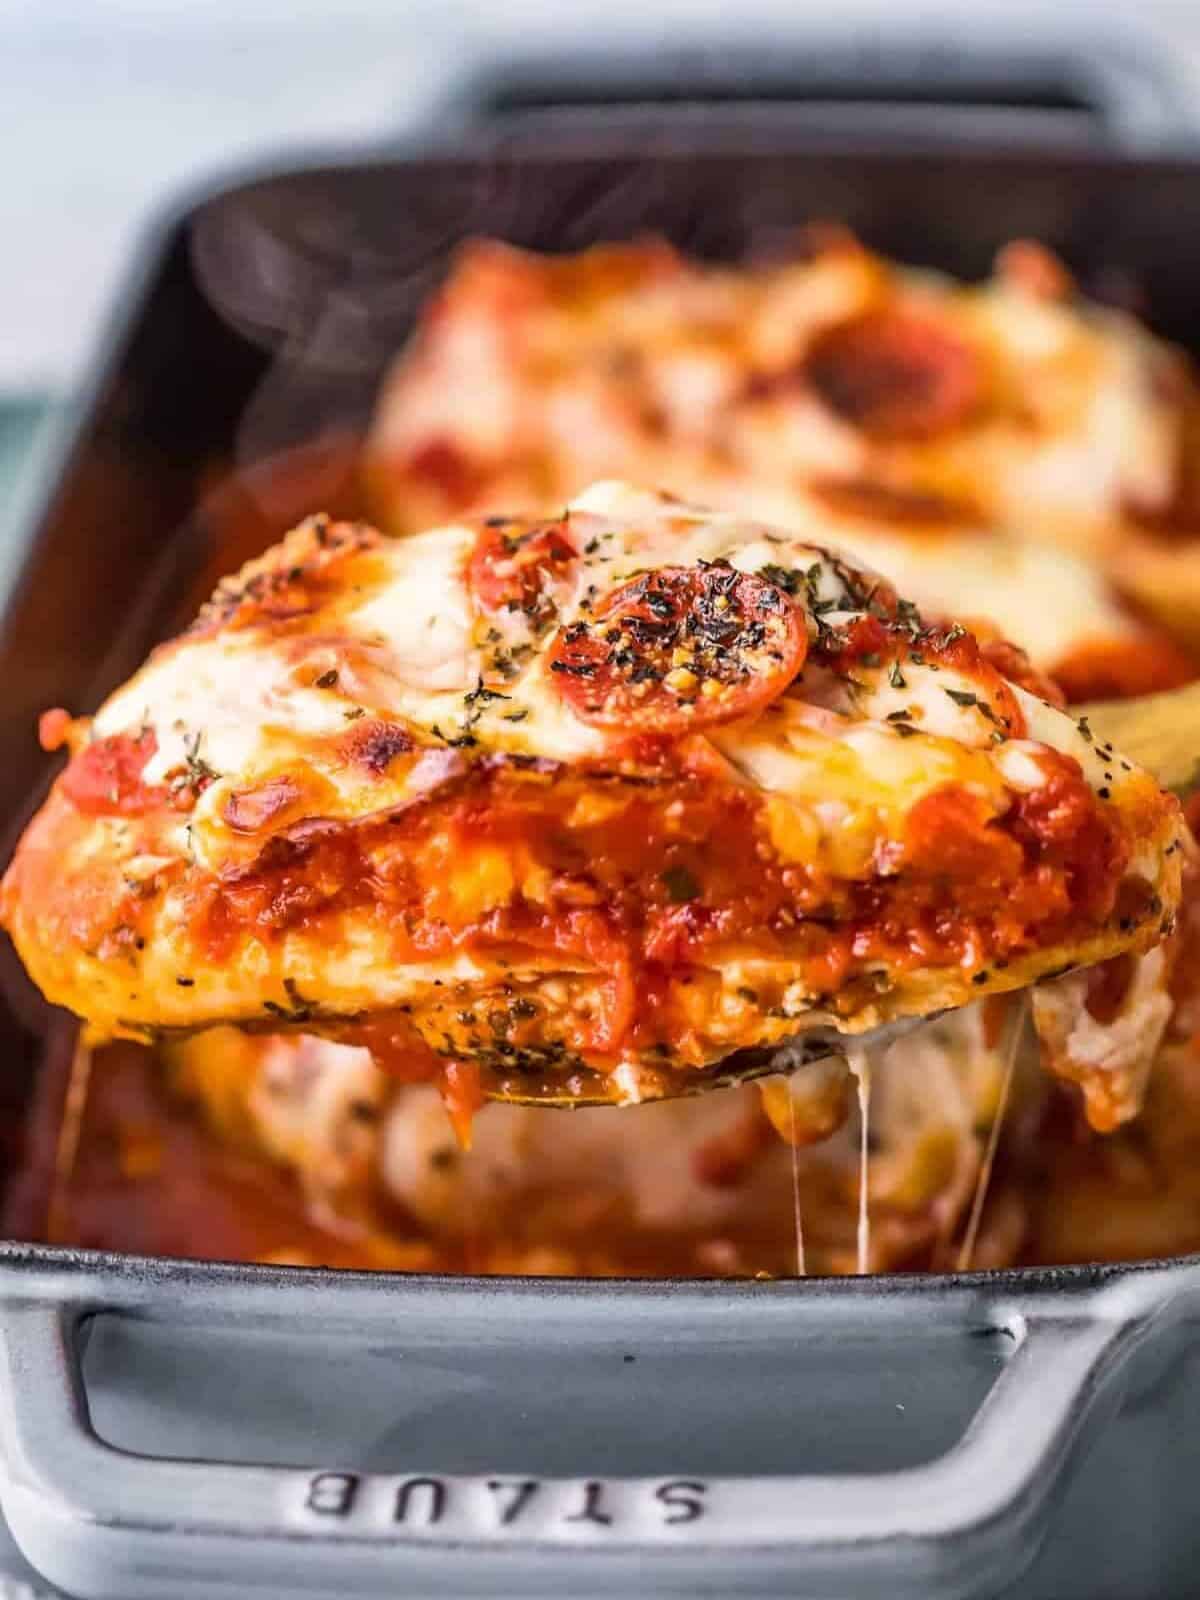 Pizza stuffed chicken breast viewed from the side.